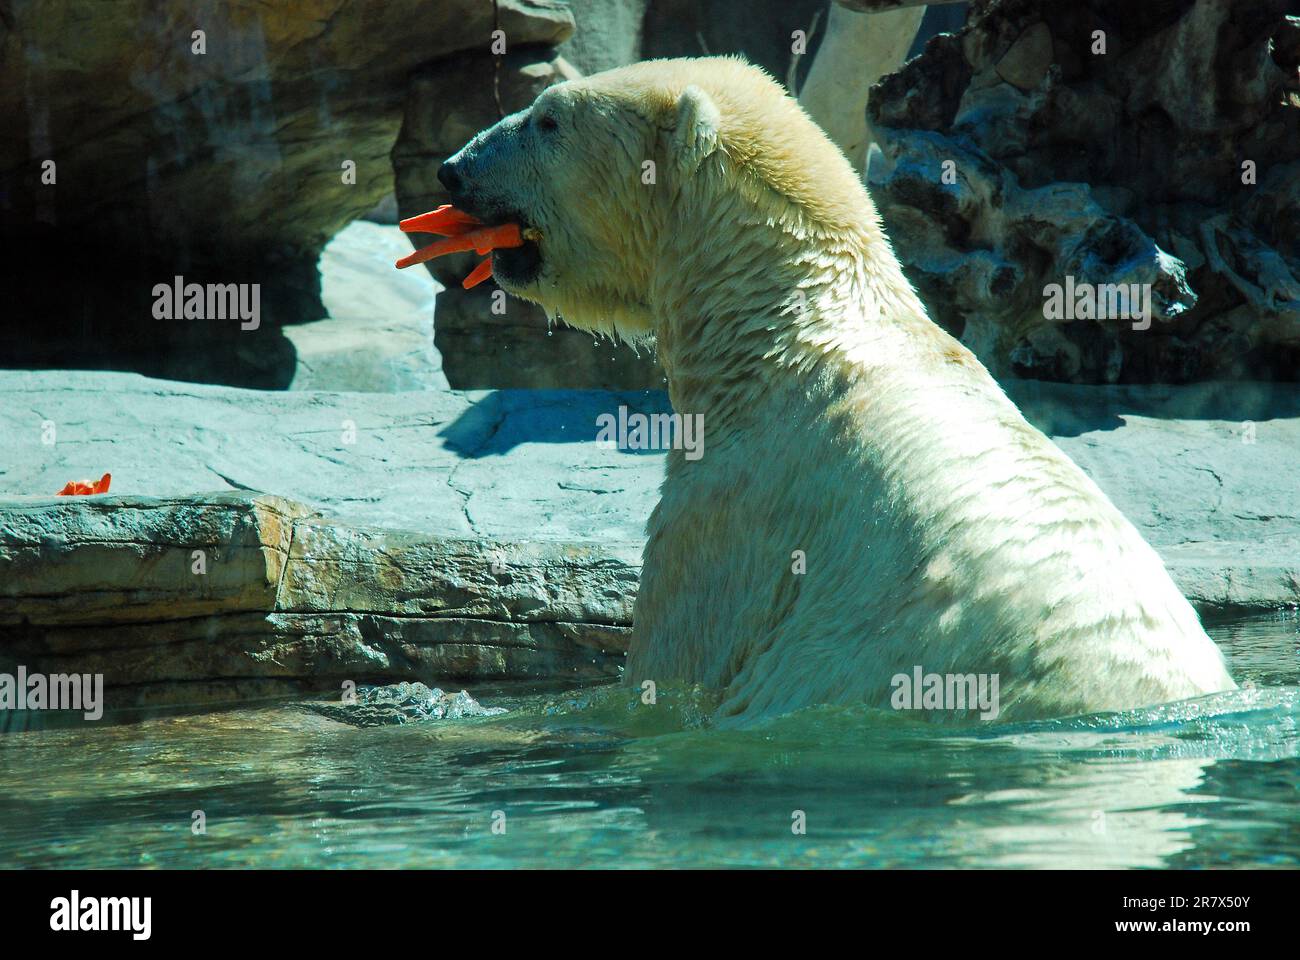 A polar bear grabs a mouthful of carrots for a snack in its mouth at a zoo Stock Photo